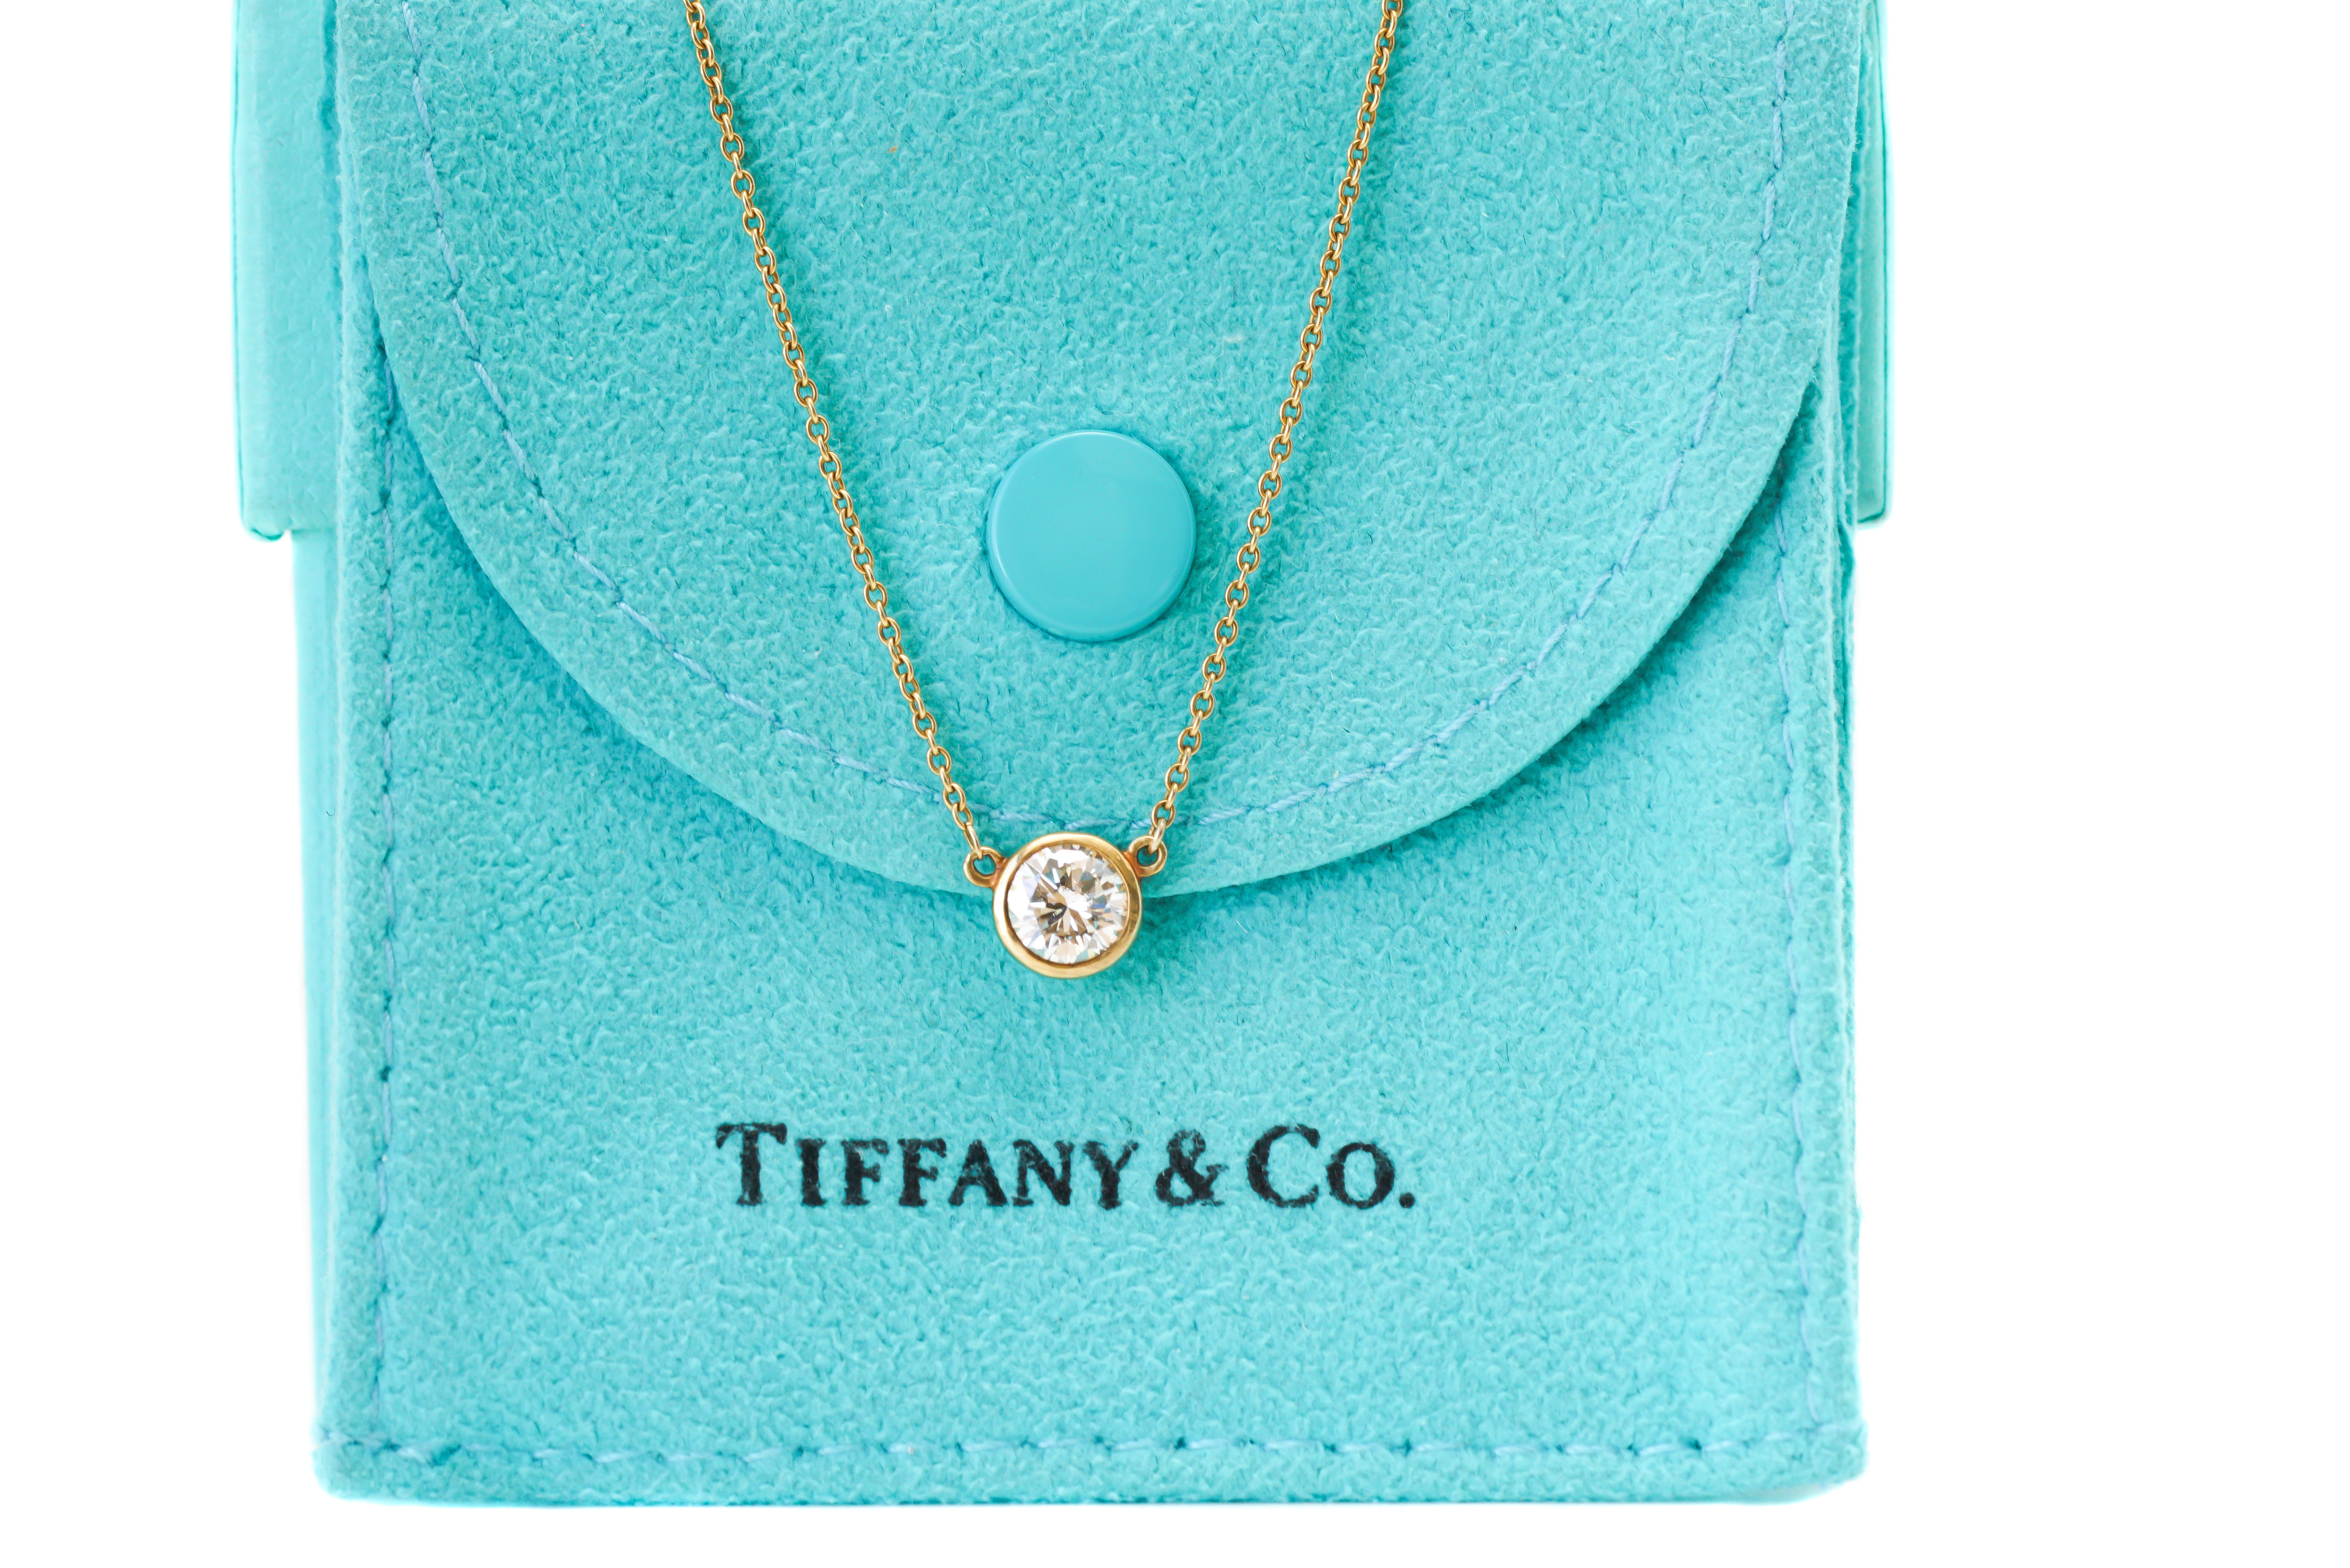 tiffany & co name necklace